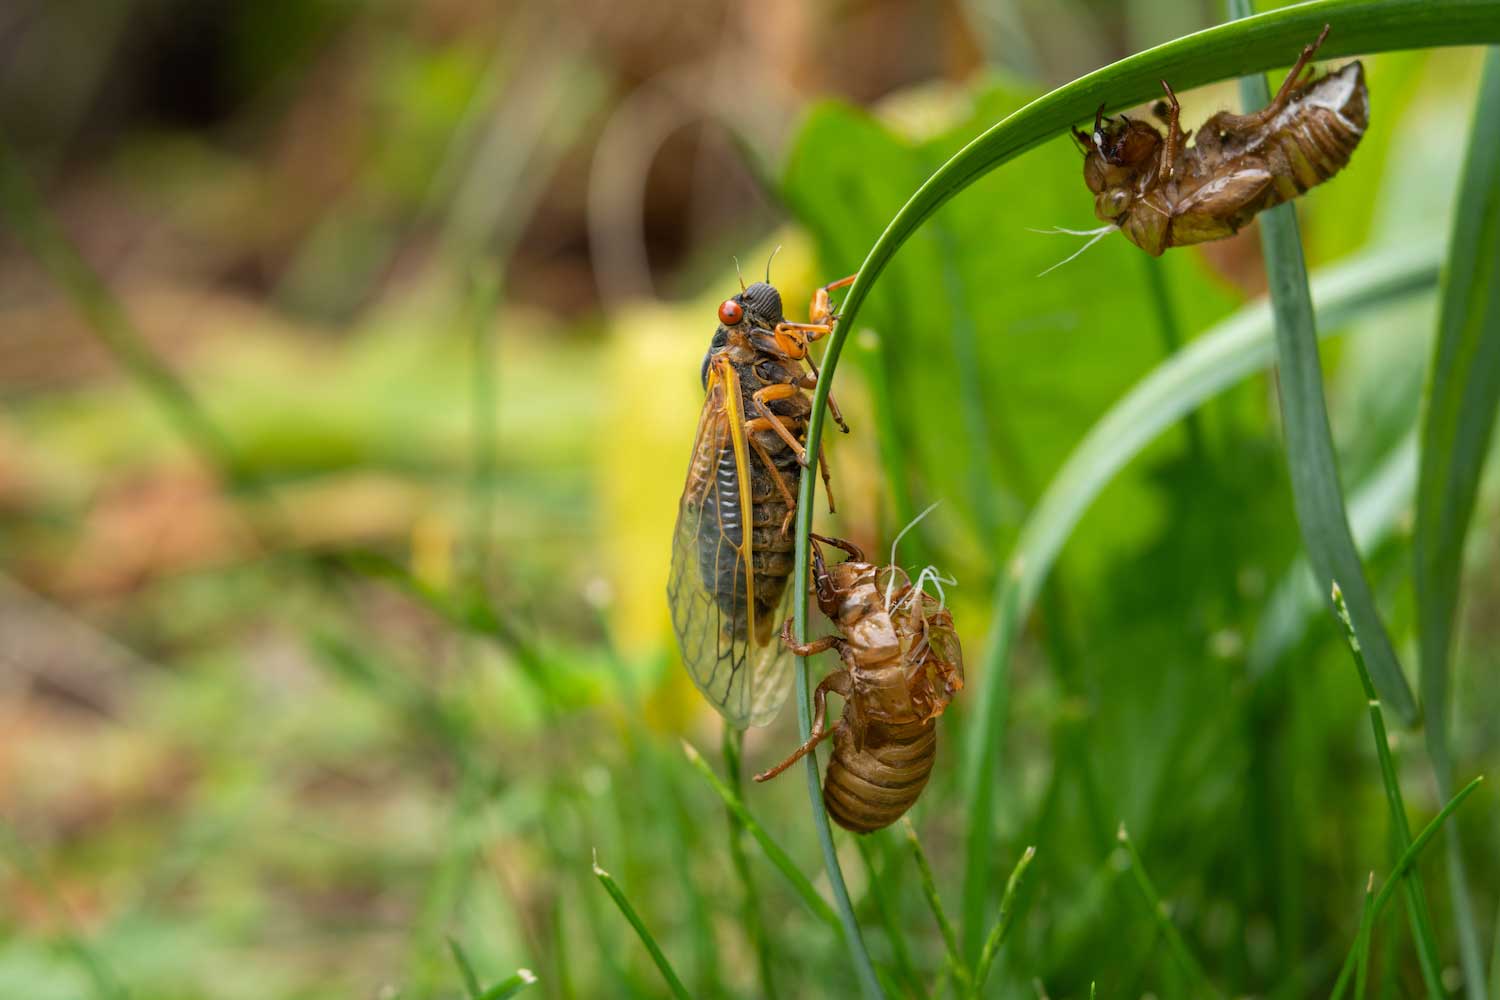 A cicada and two cicada exoskeletons on grass.